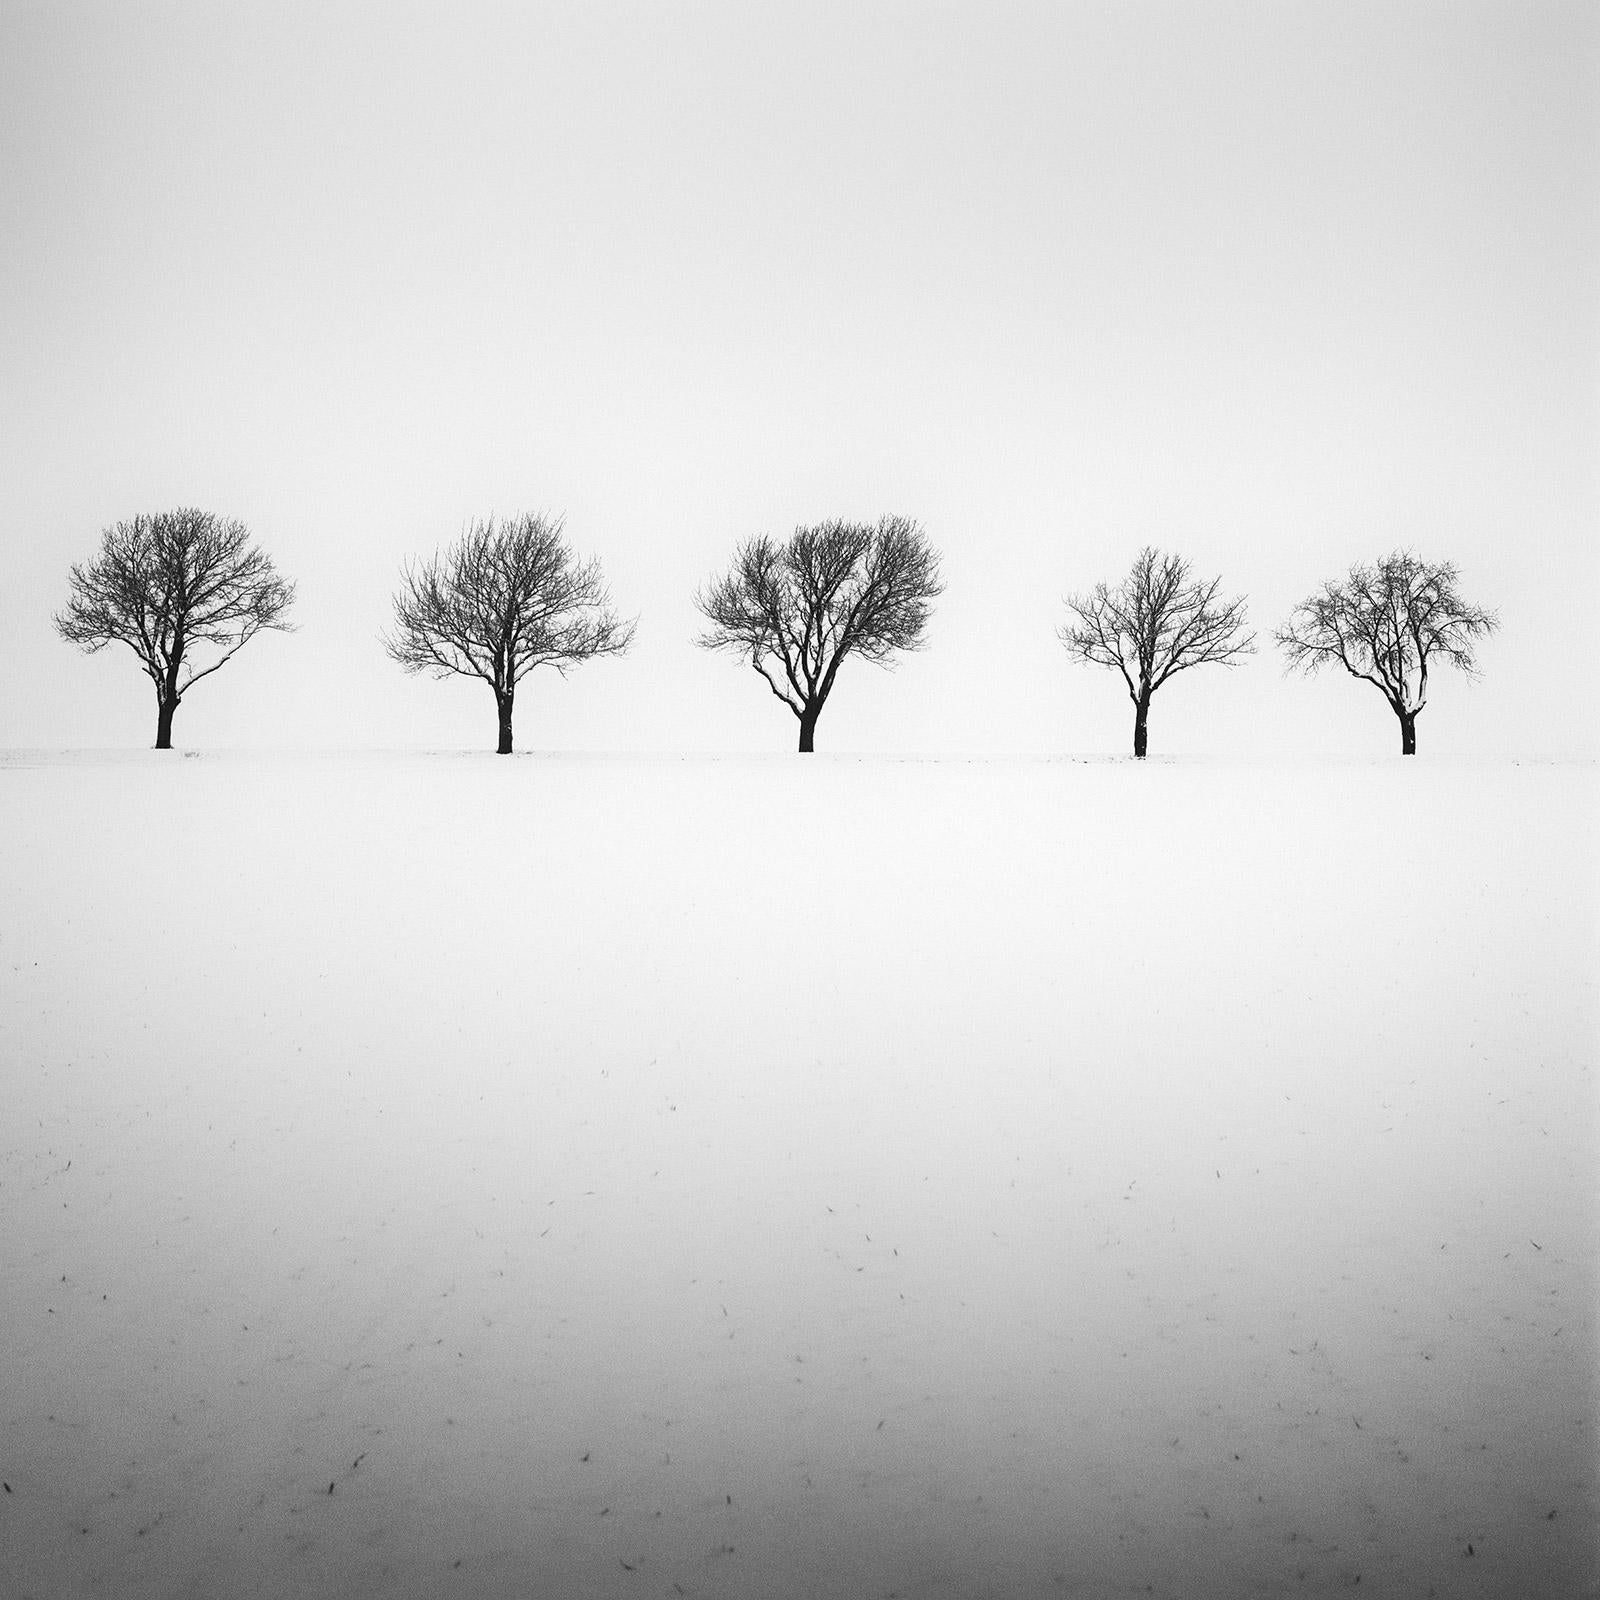 Five Trees in snowy Field, Austria, black and white fine photography, landscape